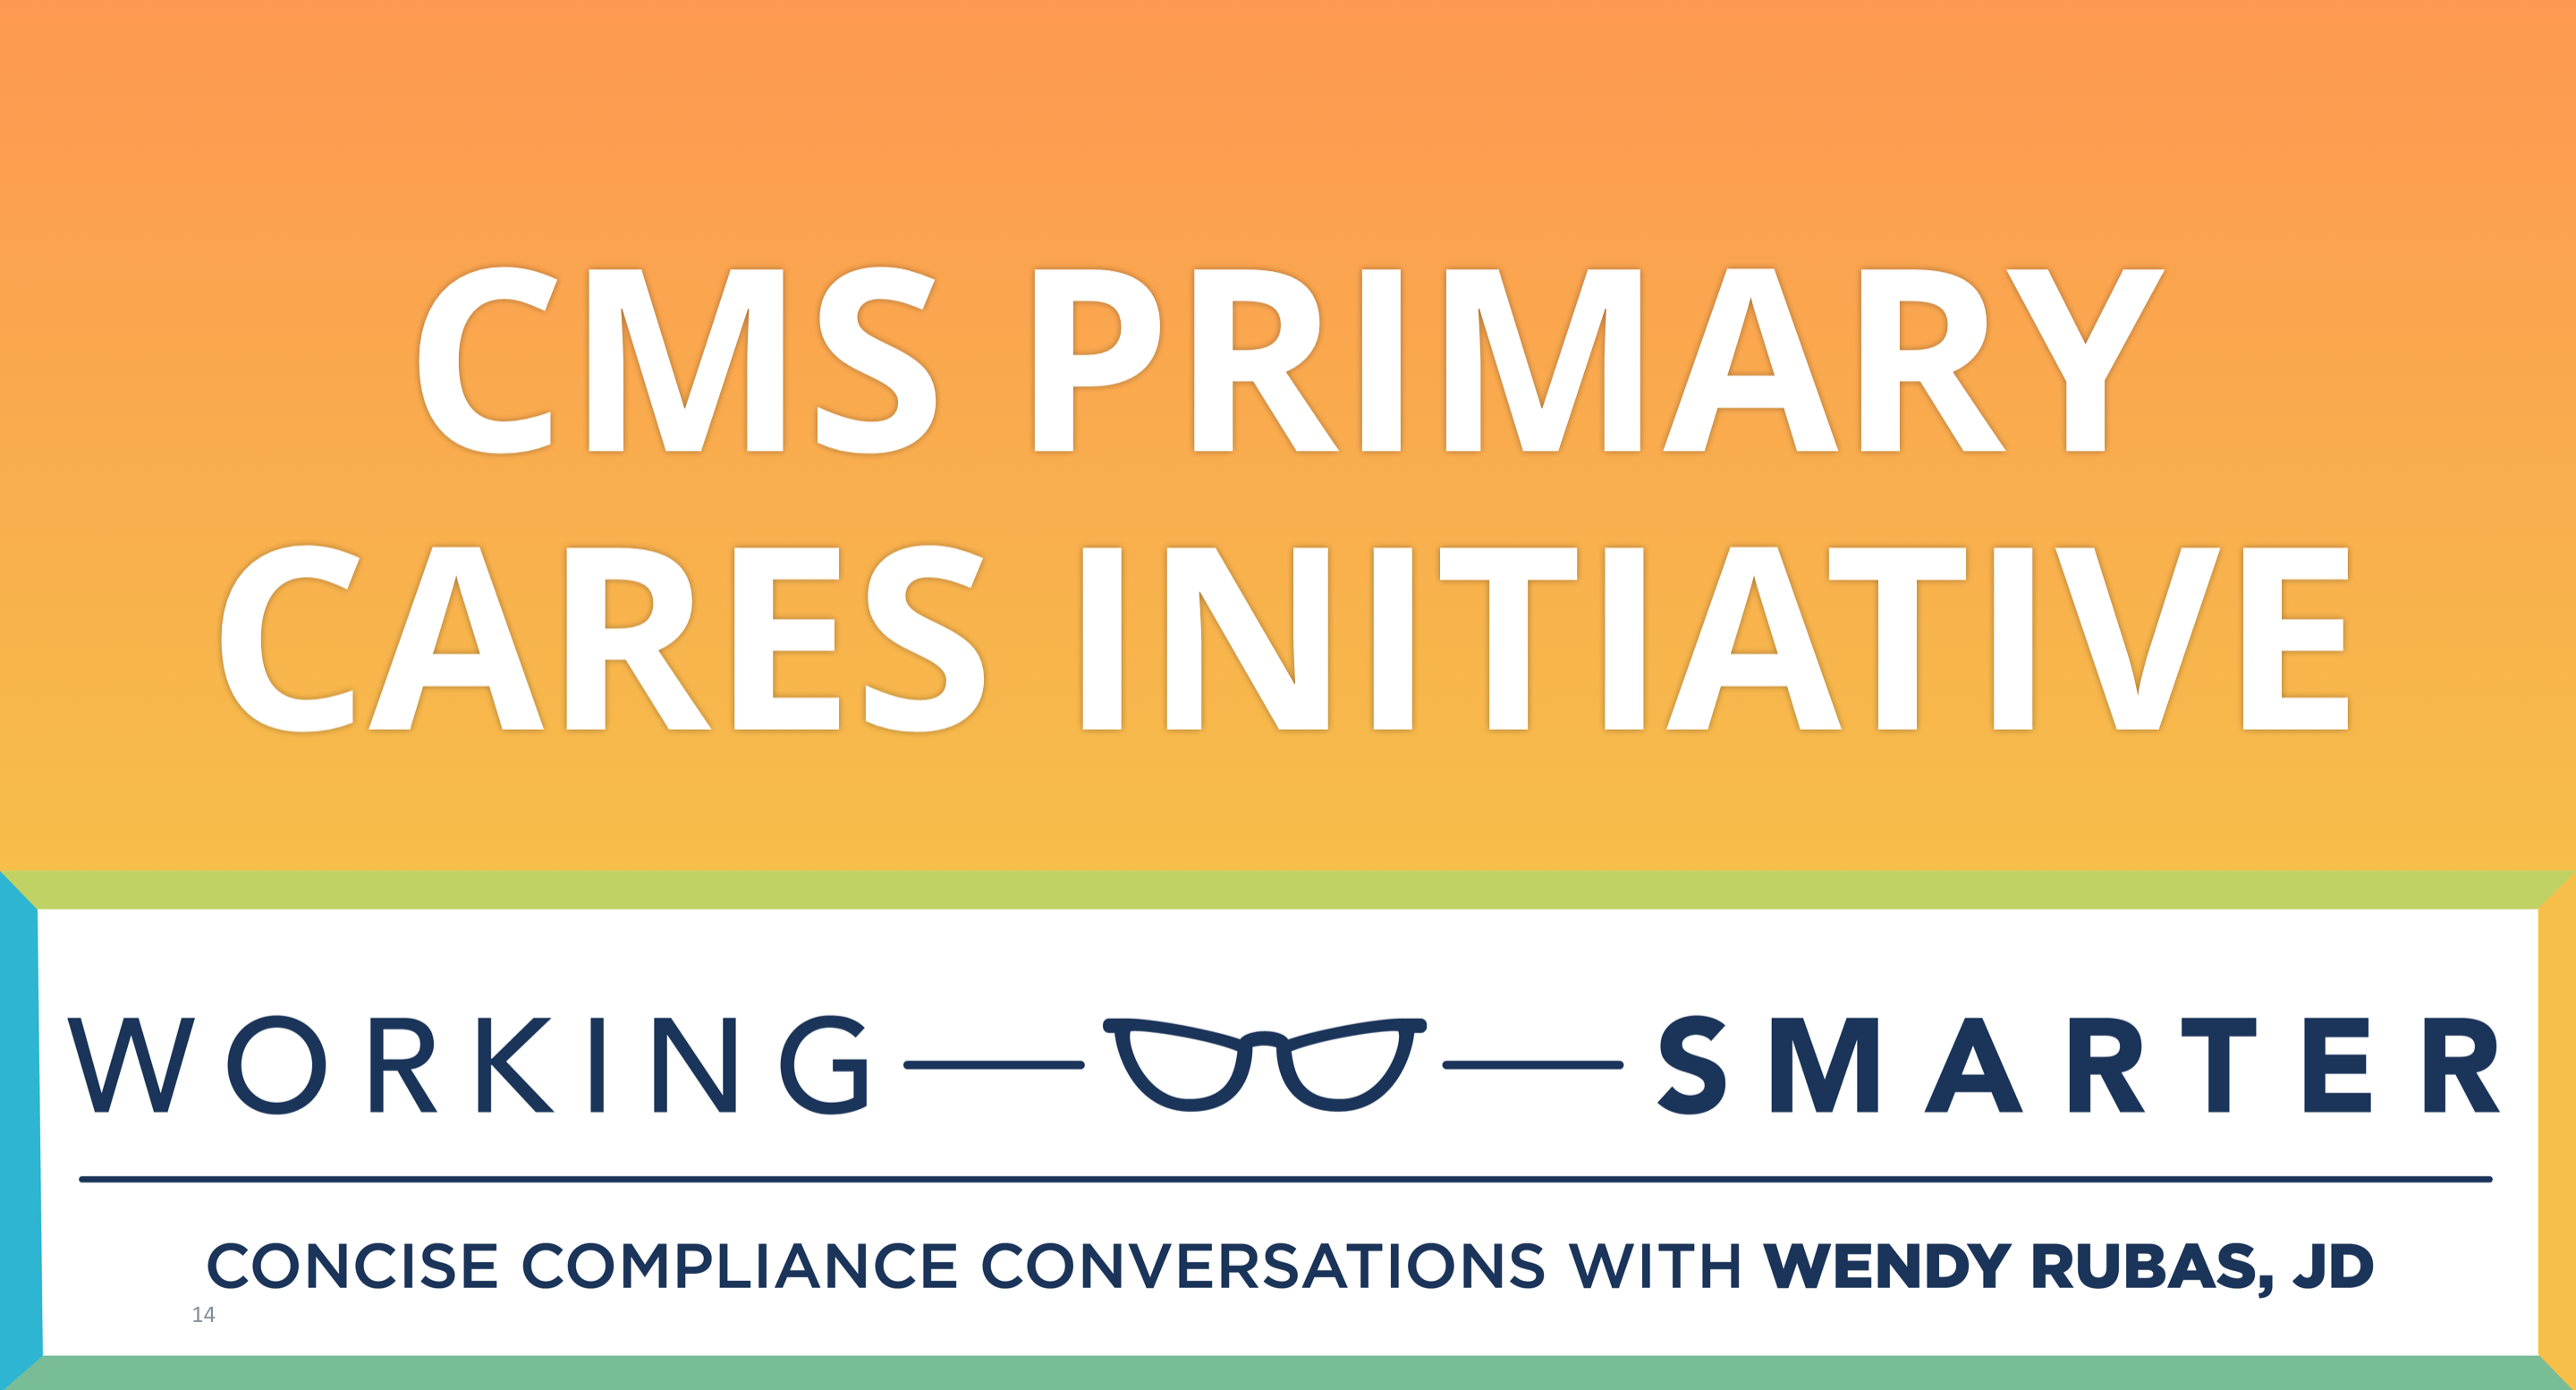 Working Smarter: CMS Primary Cares Initiative